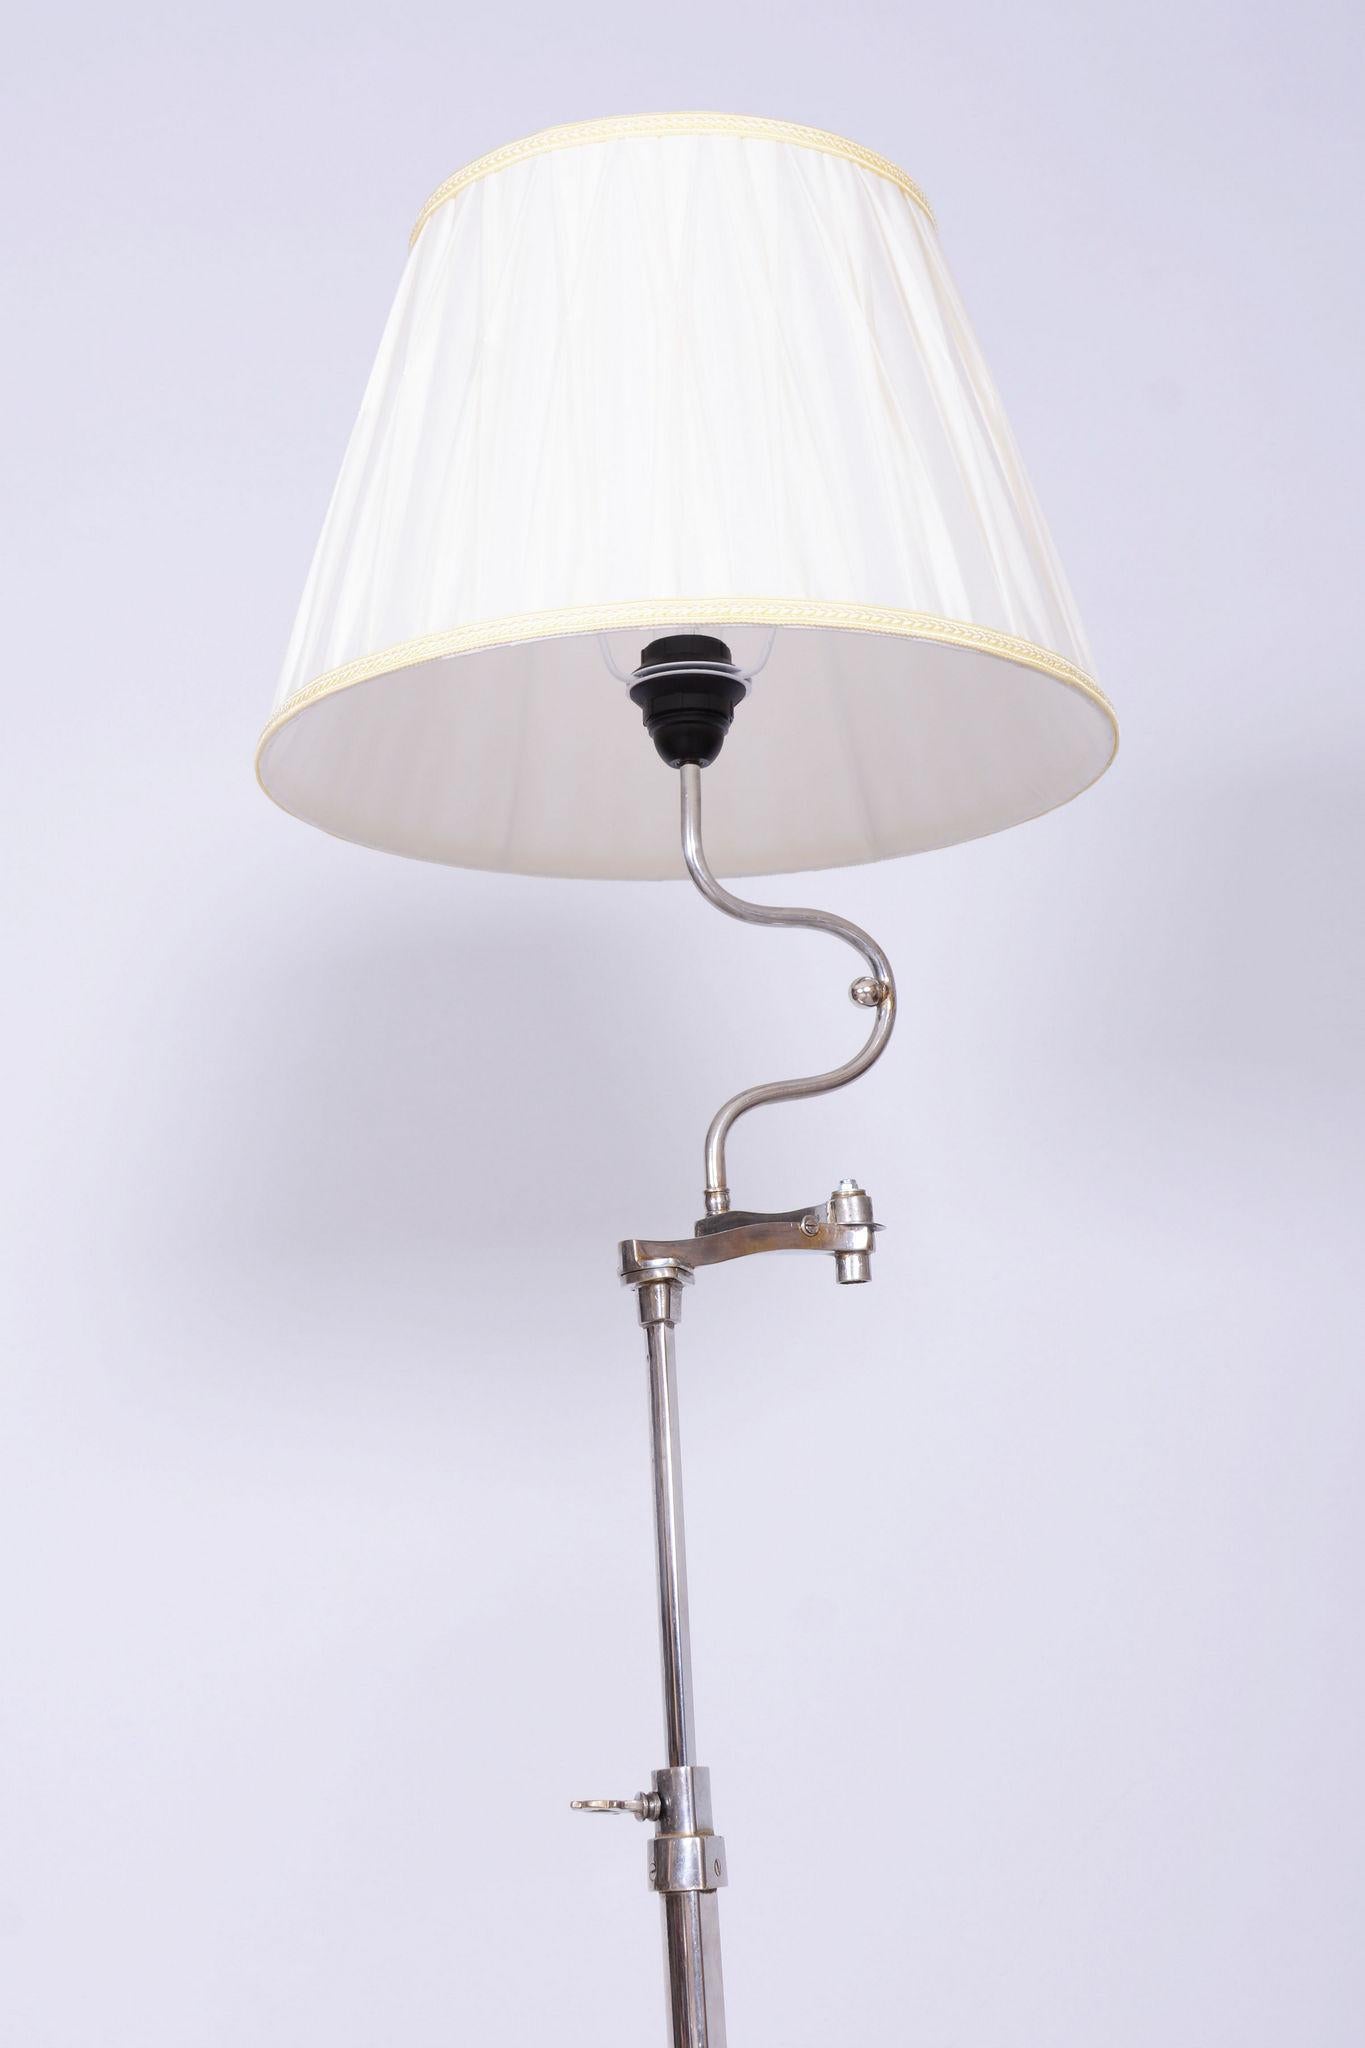 Restored Art Deco Floor Lamp, New Electrification, Chrome, Steel, Czechia, 1920s In Good Condition For Sale In Horomerice, CZ